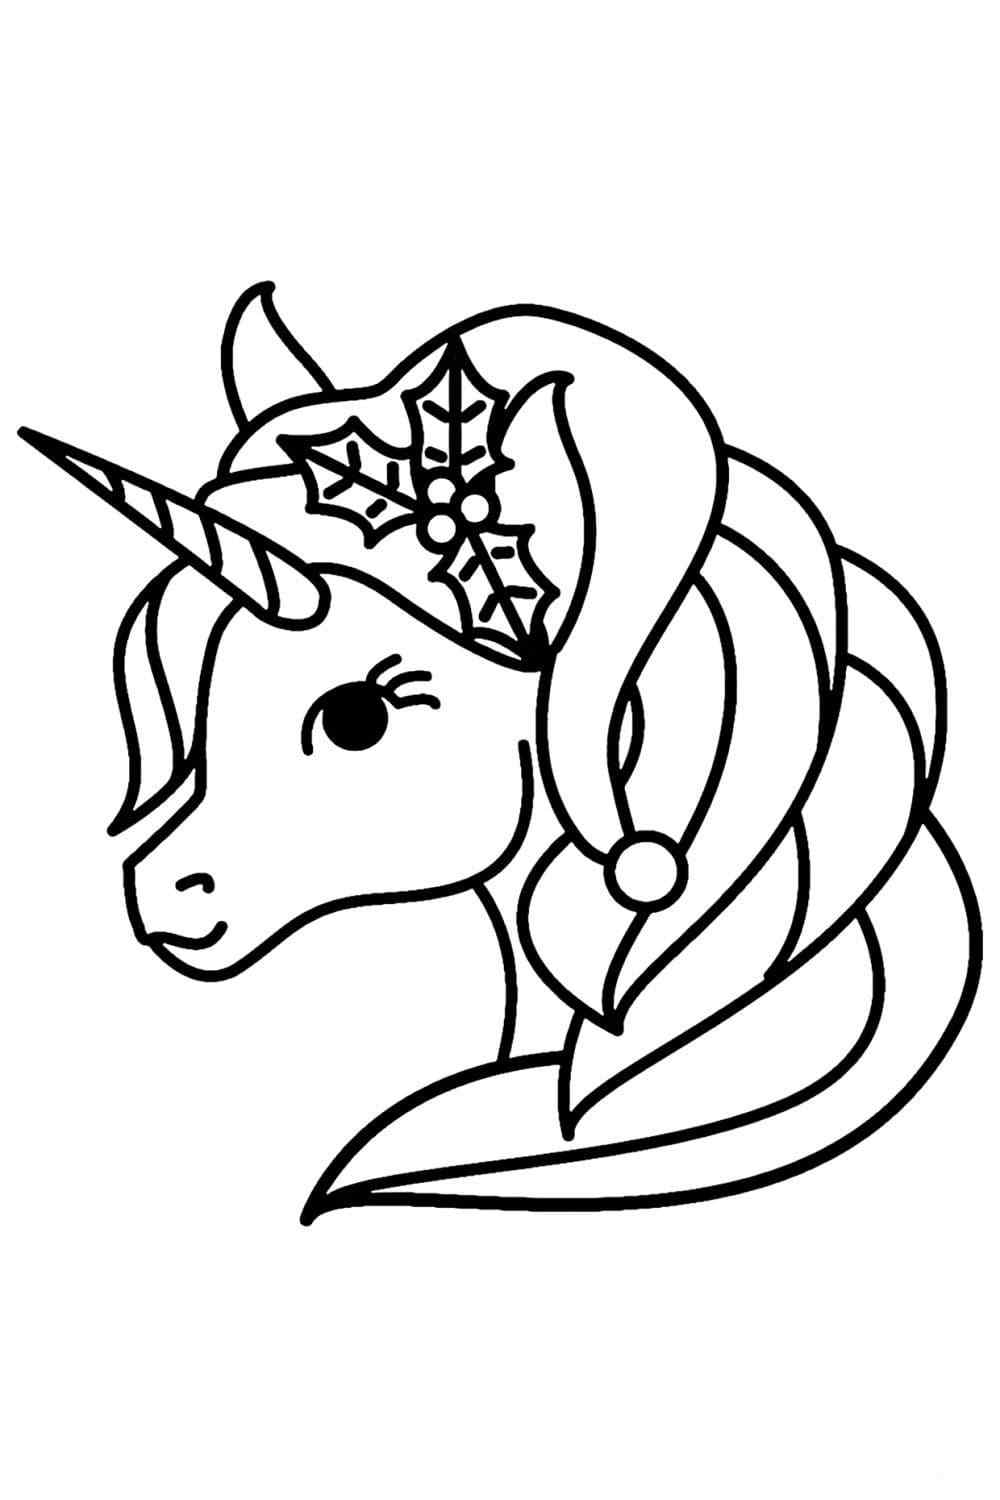 Winter Flowers Adorn The Unicorn’s Mane Coloring Page